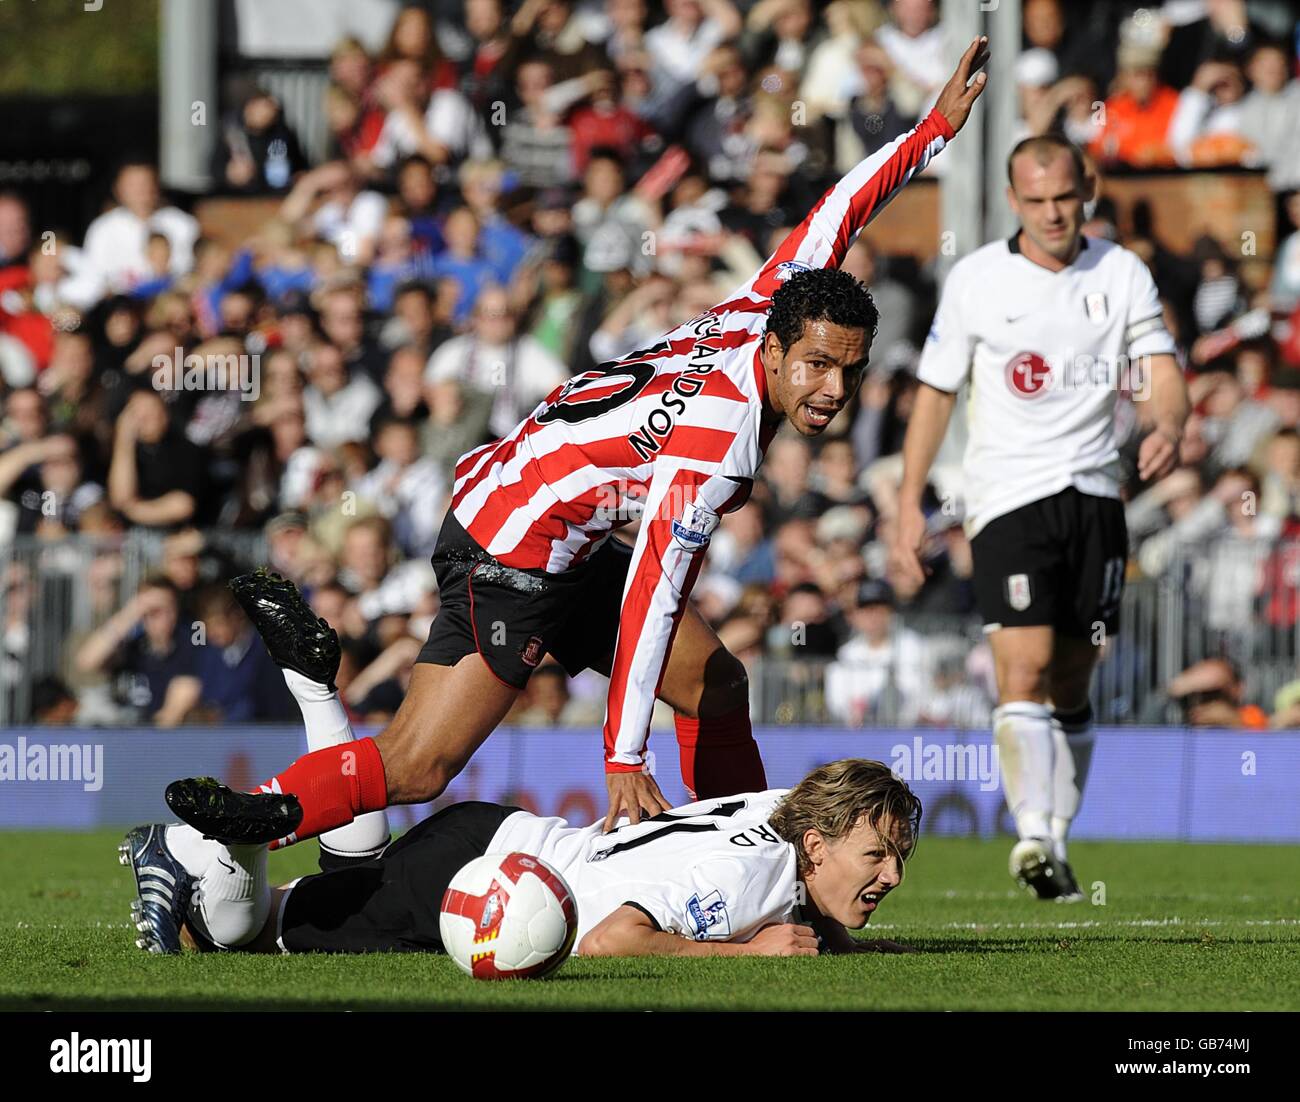 Soccer - Barclays Premier League - Fulham v Sunderland - Craven Cottage. Fulham's Jimmy Bullard lies on the ground after a battle with Sunderland's Kieran Richardson for the ball. Stock Photo